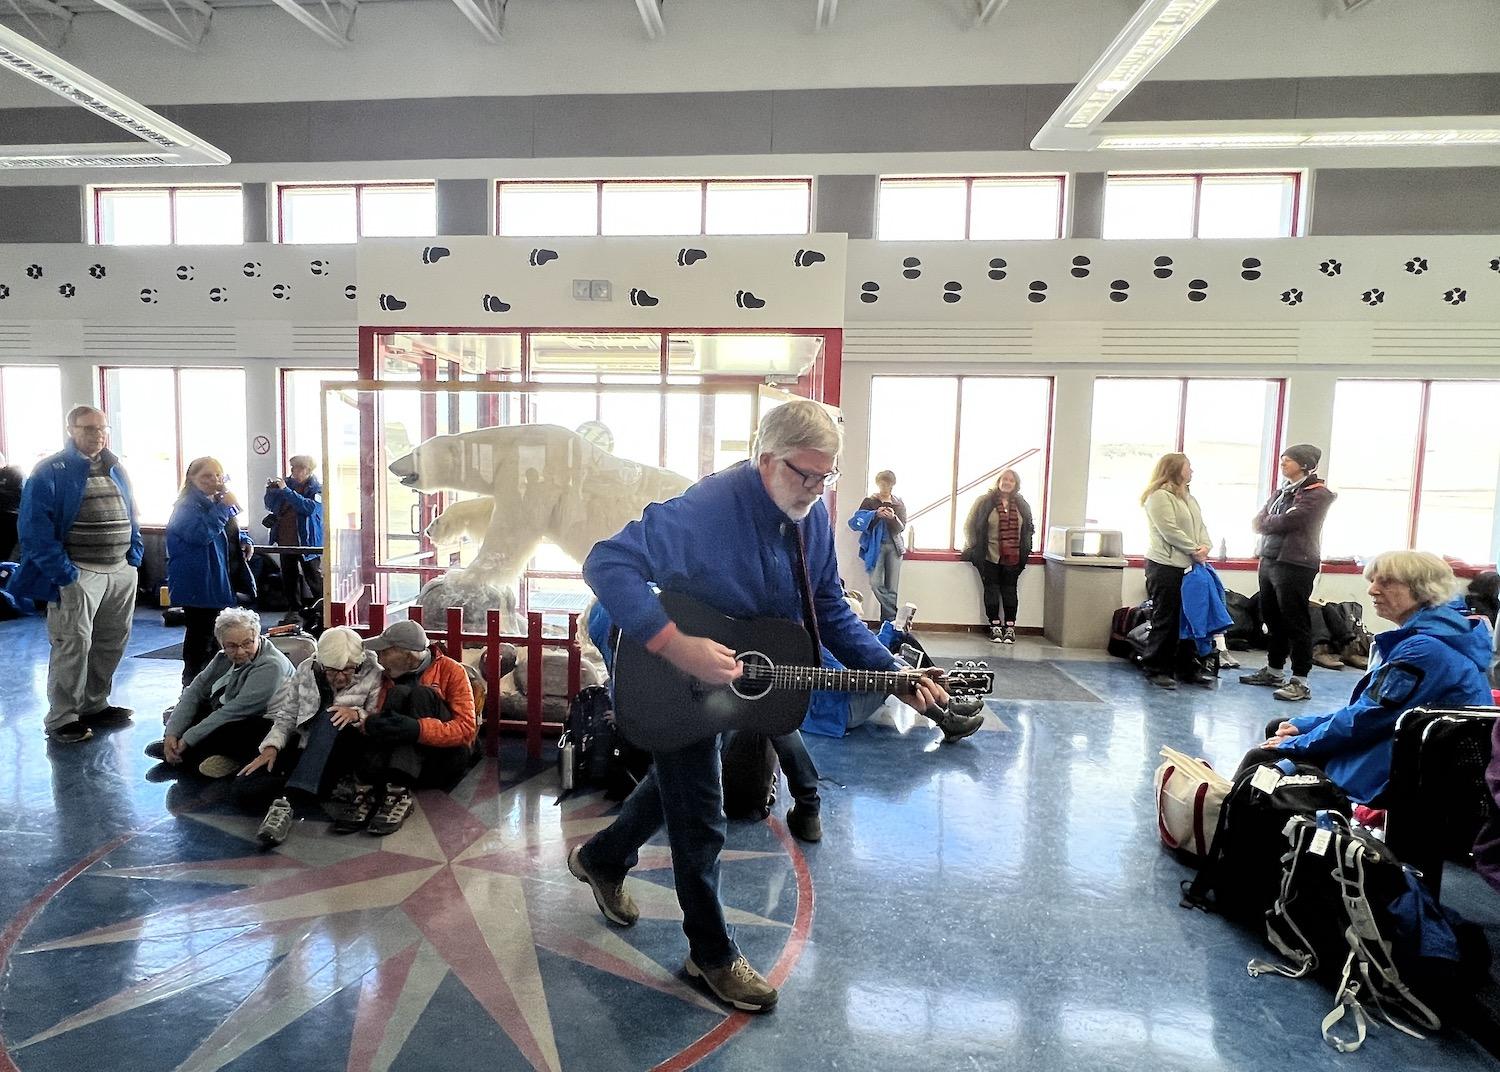 At Resolute Bay Airport before a charter flight, Adventure Canada High Arctic Explorer host James (J.R.) Raffan plays for guests in front of a taxidermied polar bear.